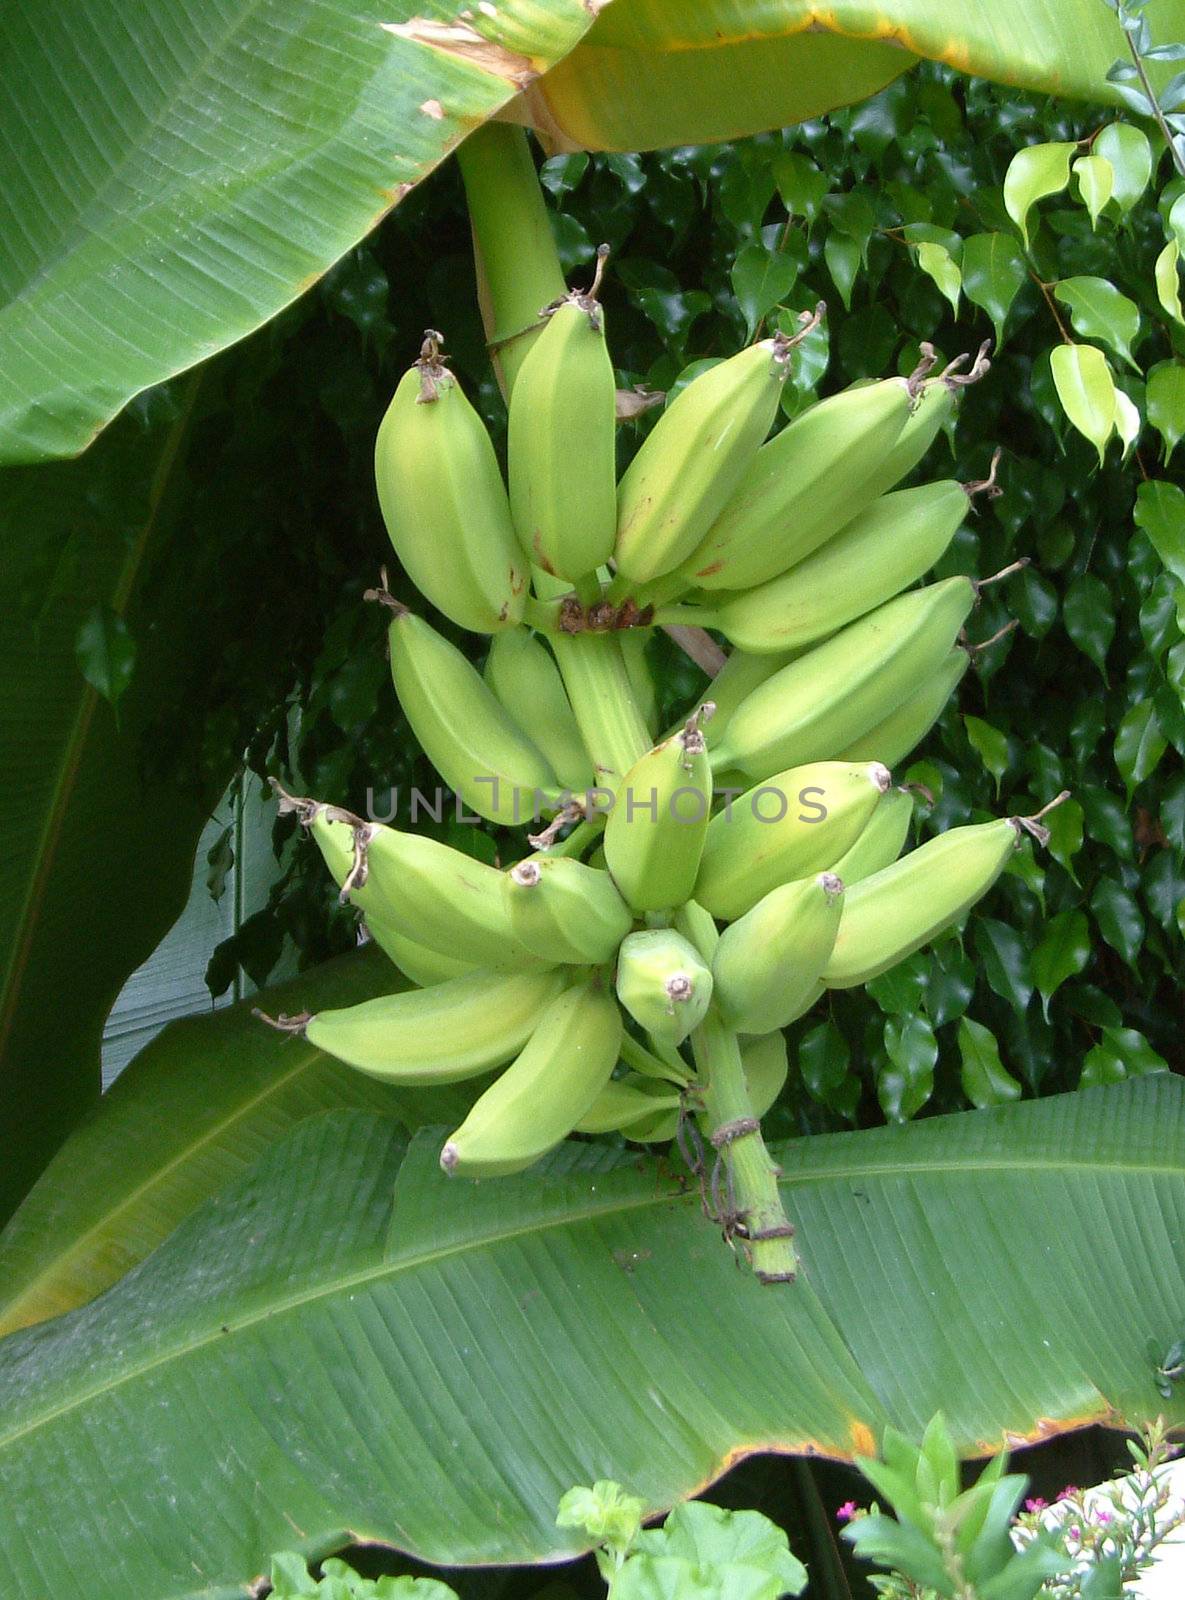 bananas on the tree by leafy